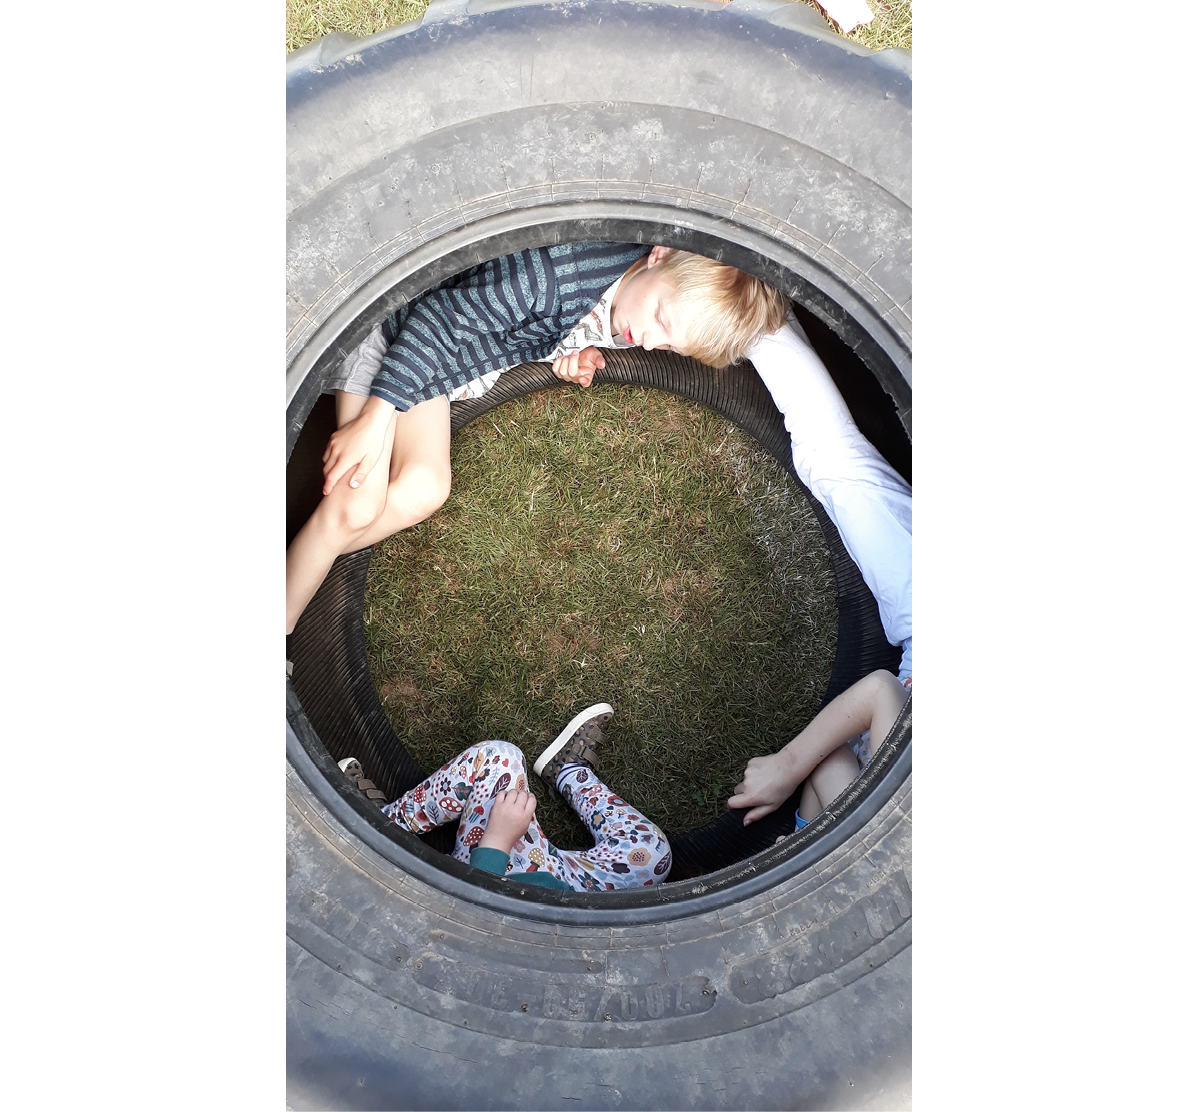 Photo looking down on three children nestled in inside rim of a tractor tyre